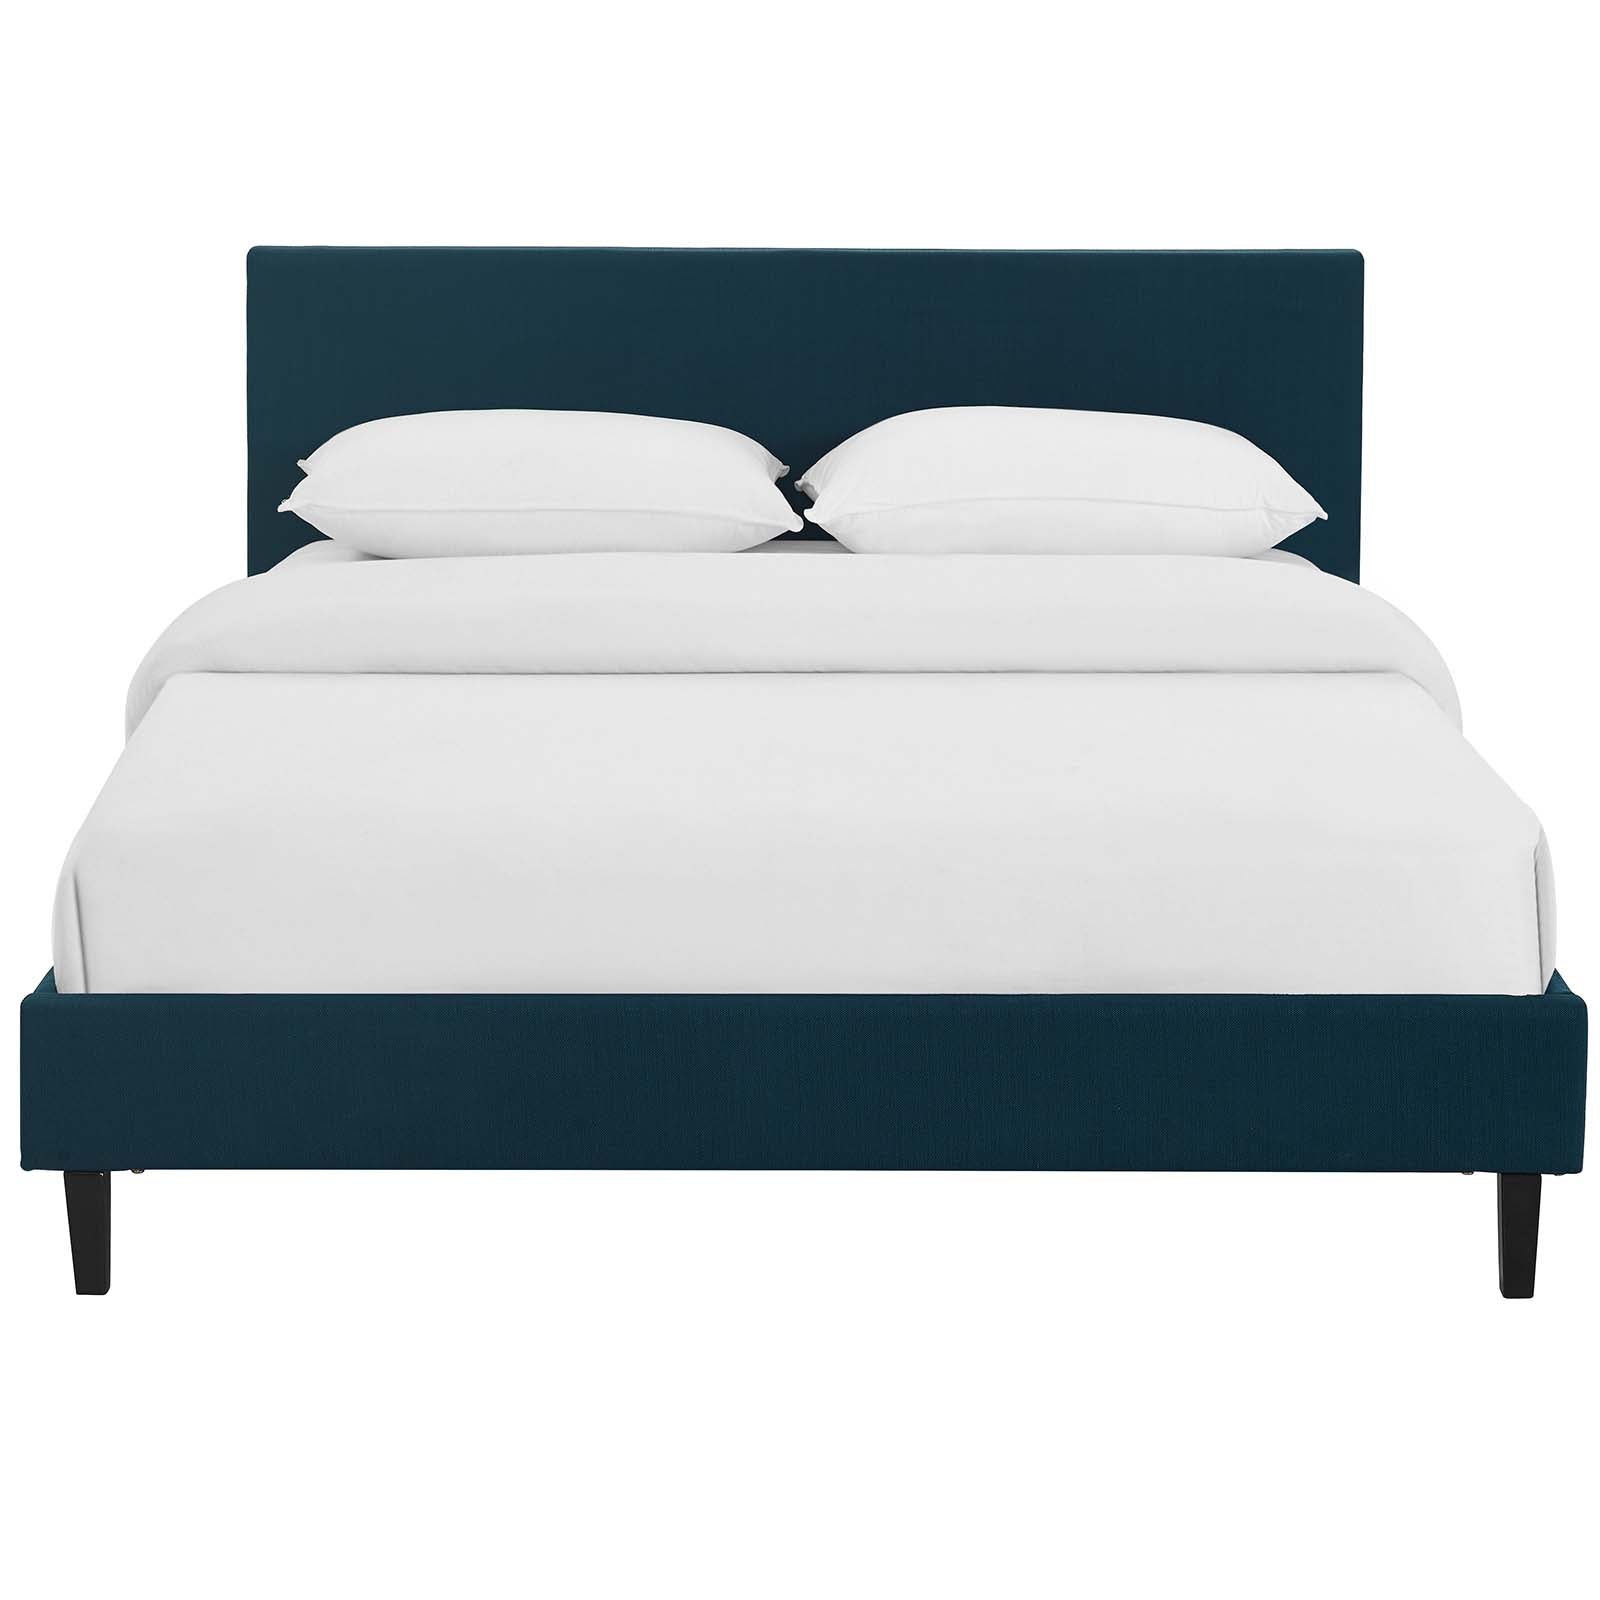 Modway Beds - Anya Full Bed Azure